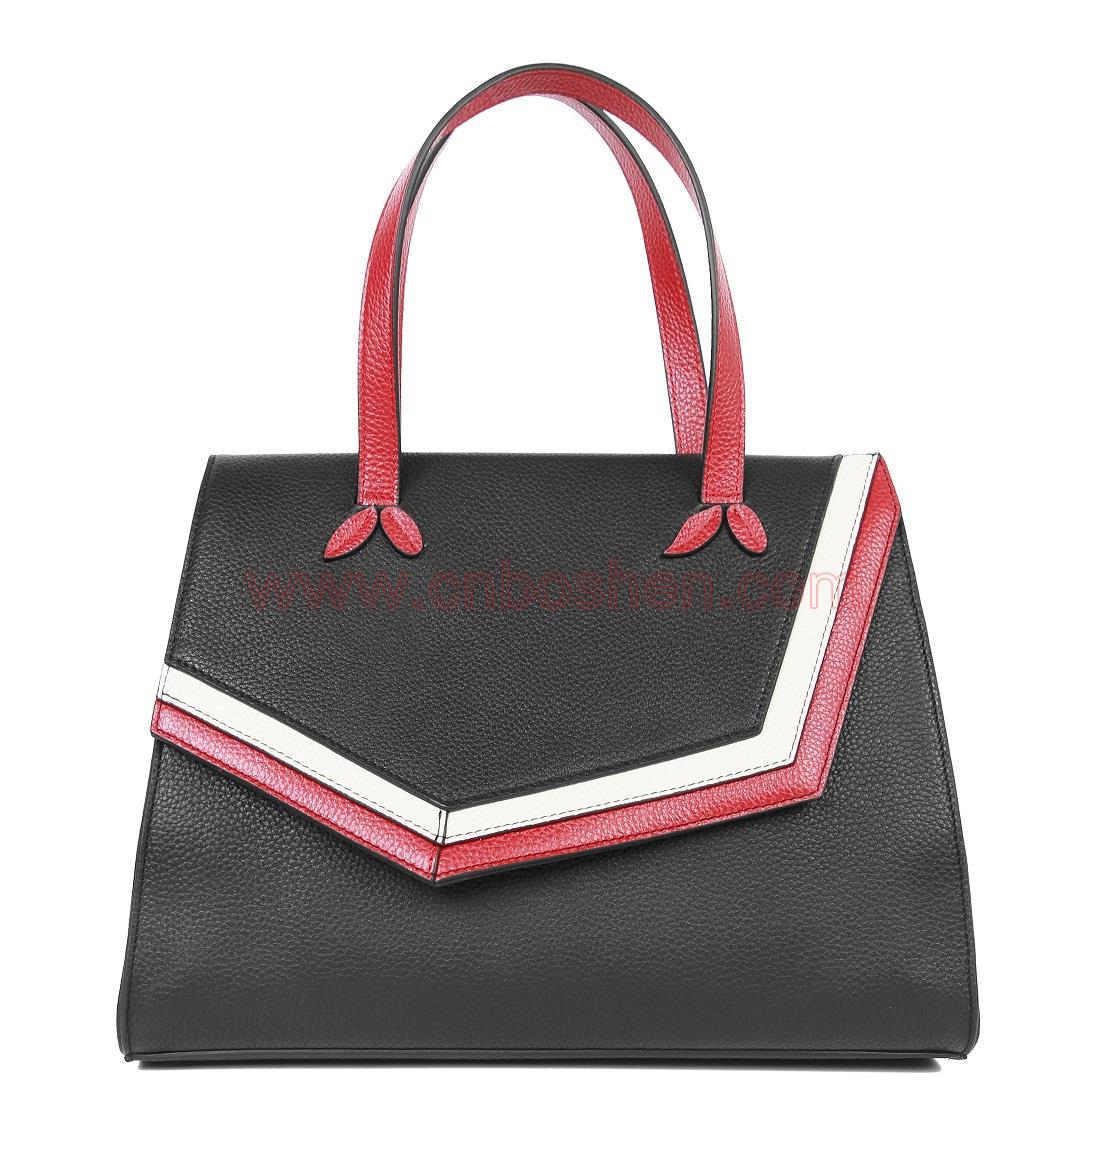 How to select a leather goods manufacturer of high-end leather gifts?